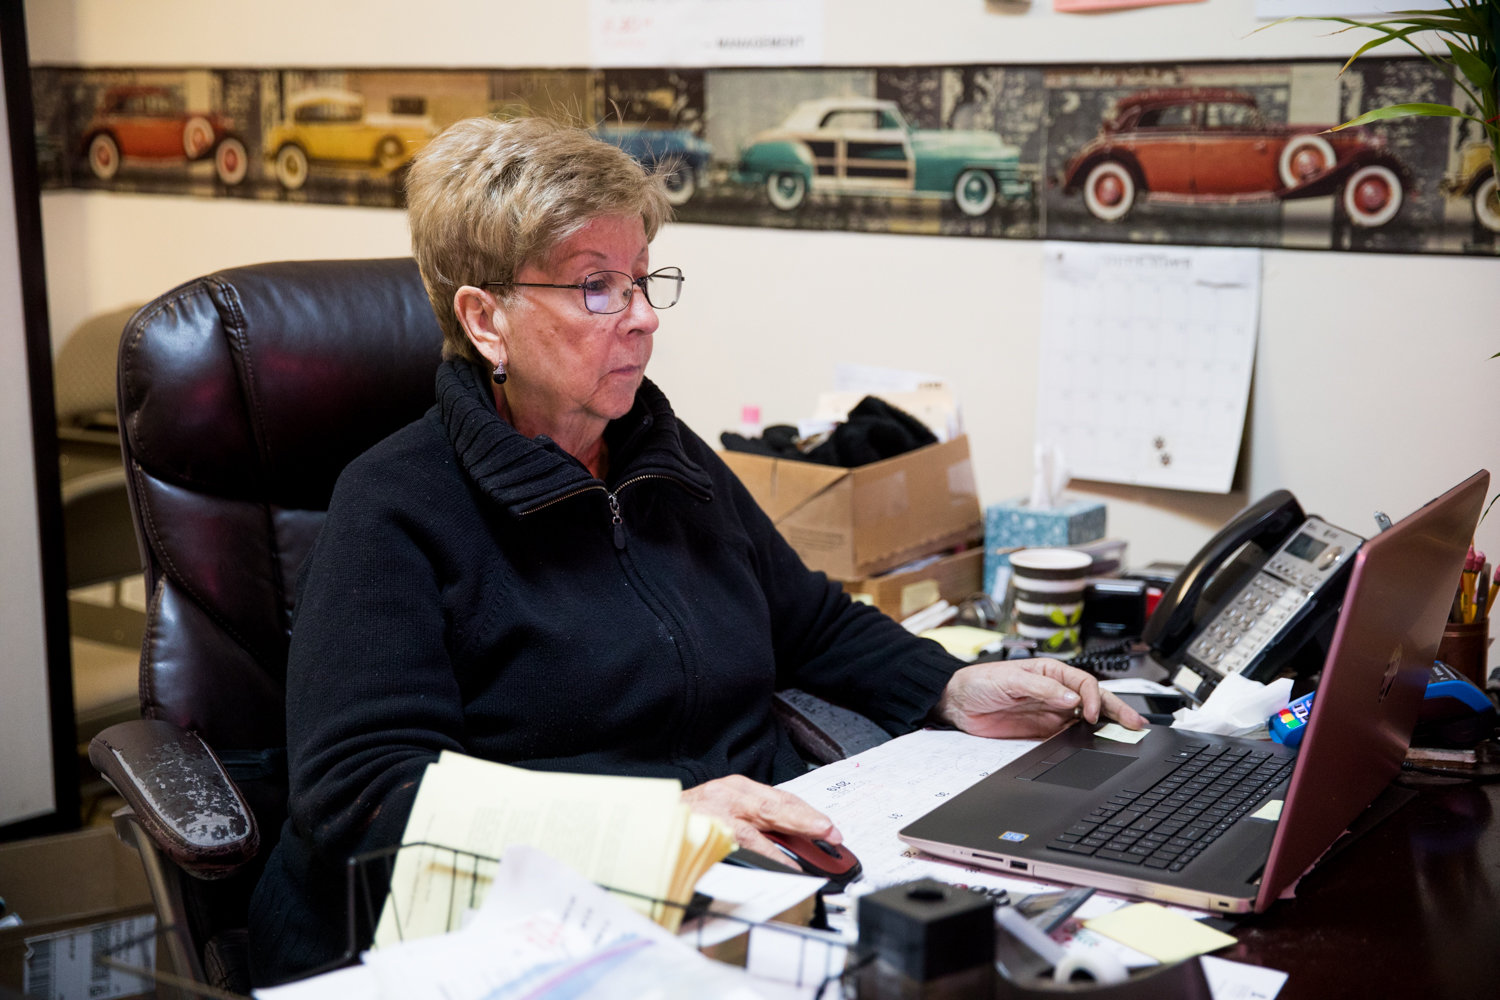 Irene Goldstein works on her computer inside Gotham Driving School, which she owns. Originally from Venezuela, Goldstein understands how the promise of a better life pulls people to the United States, but when someone walks through the door at her school, her focus is simply on getting them ready for the road.